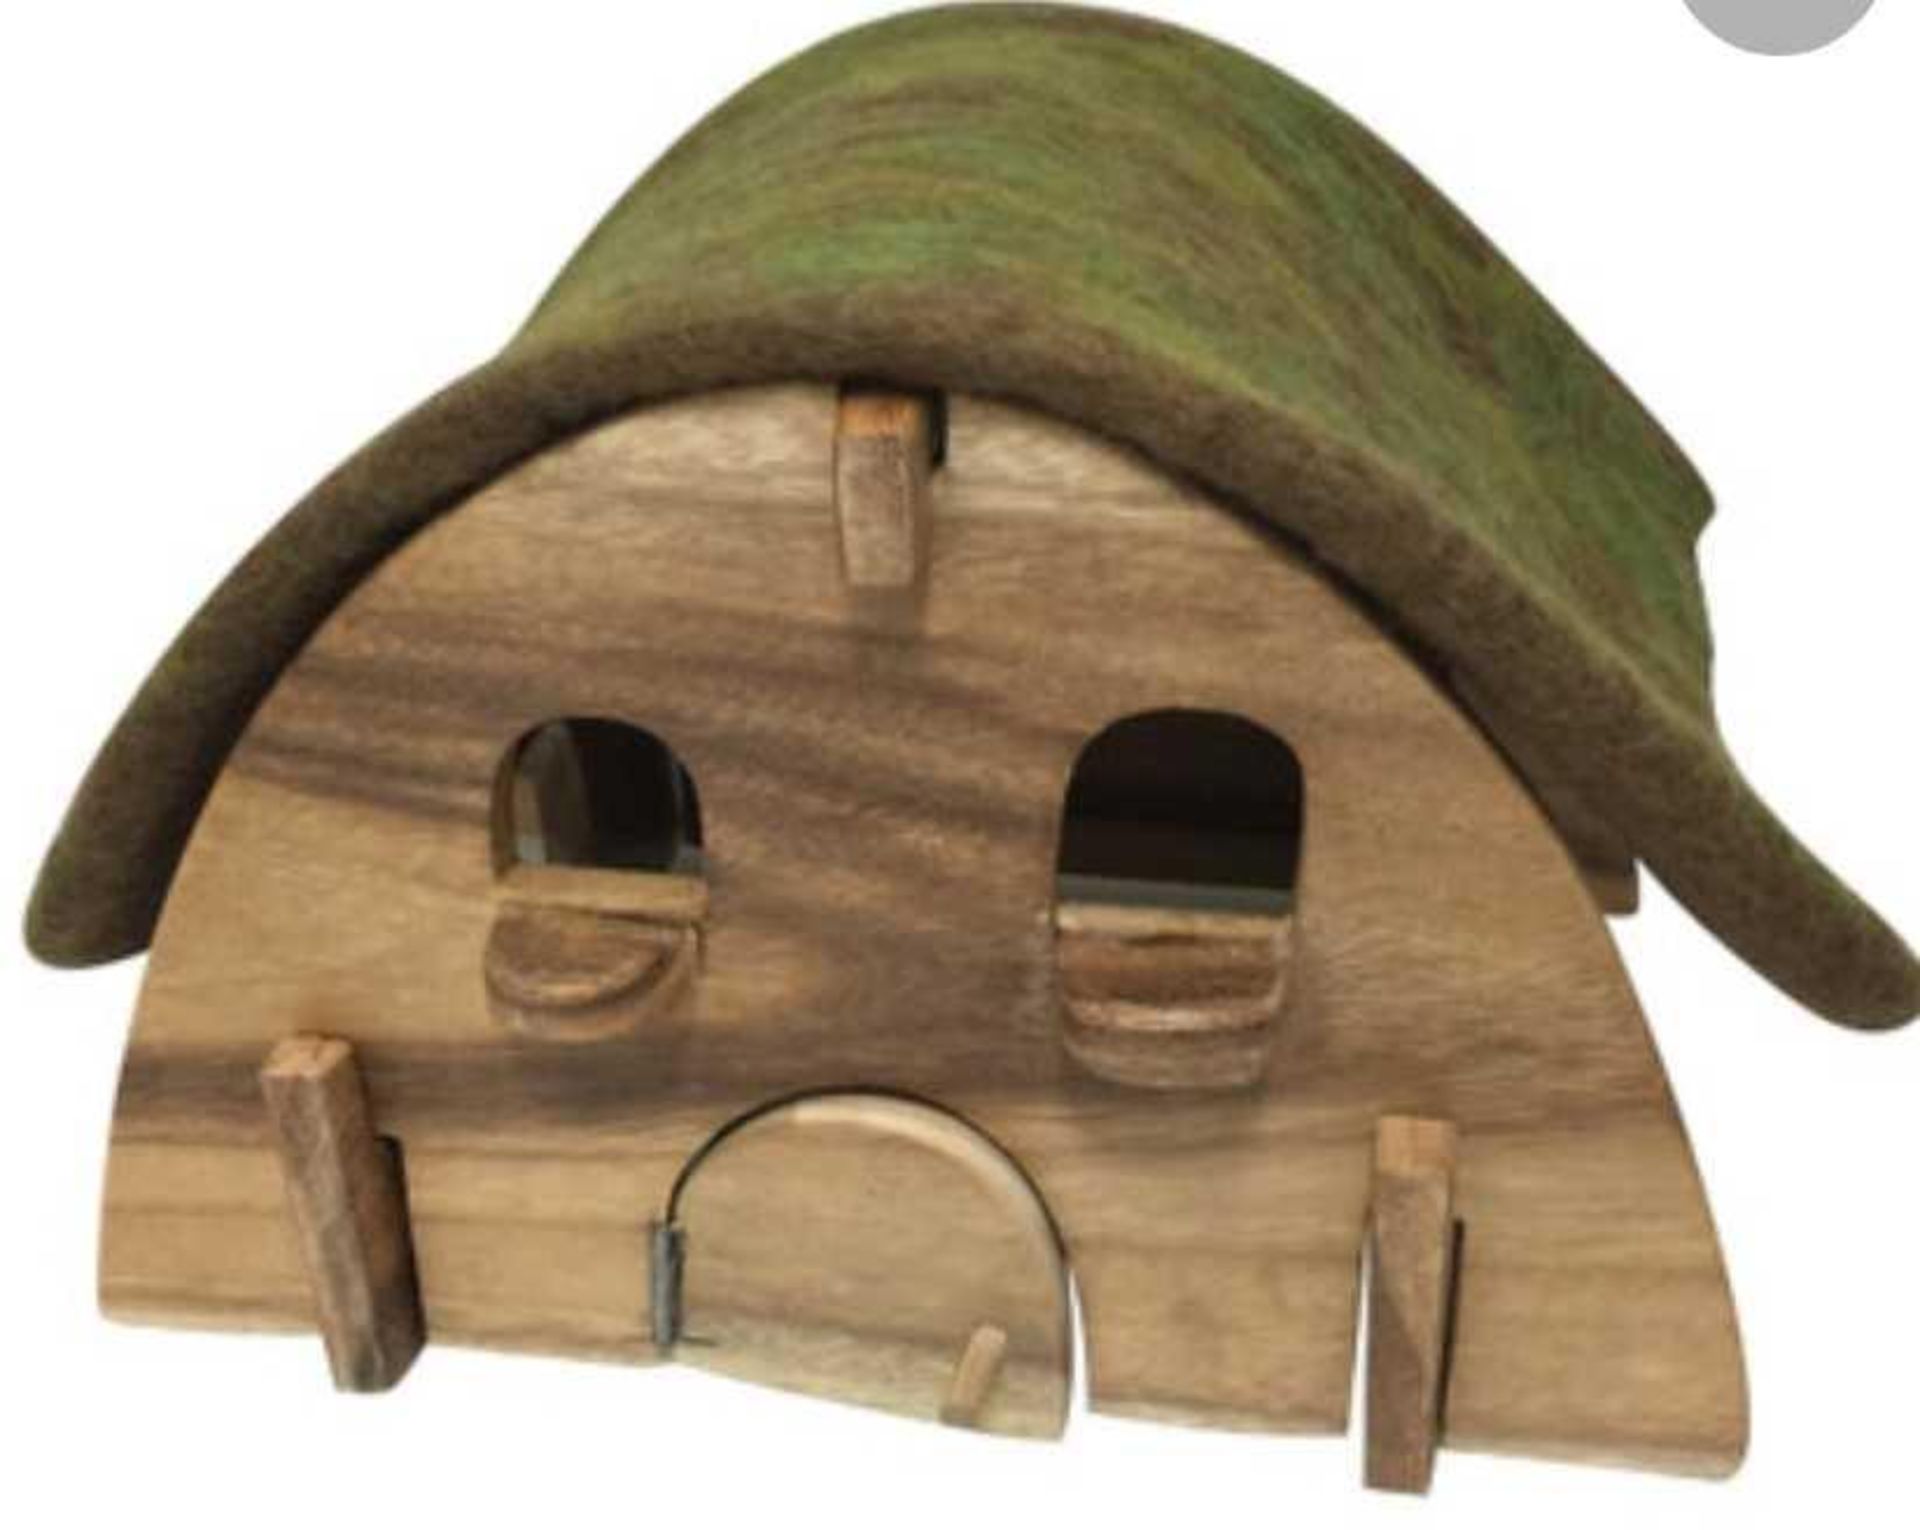 RRP £85 Boxed The Creative Wood Company Hobbit House - Image 2 of 2